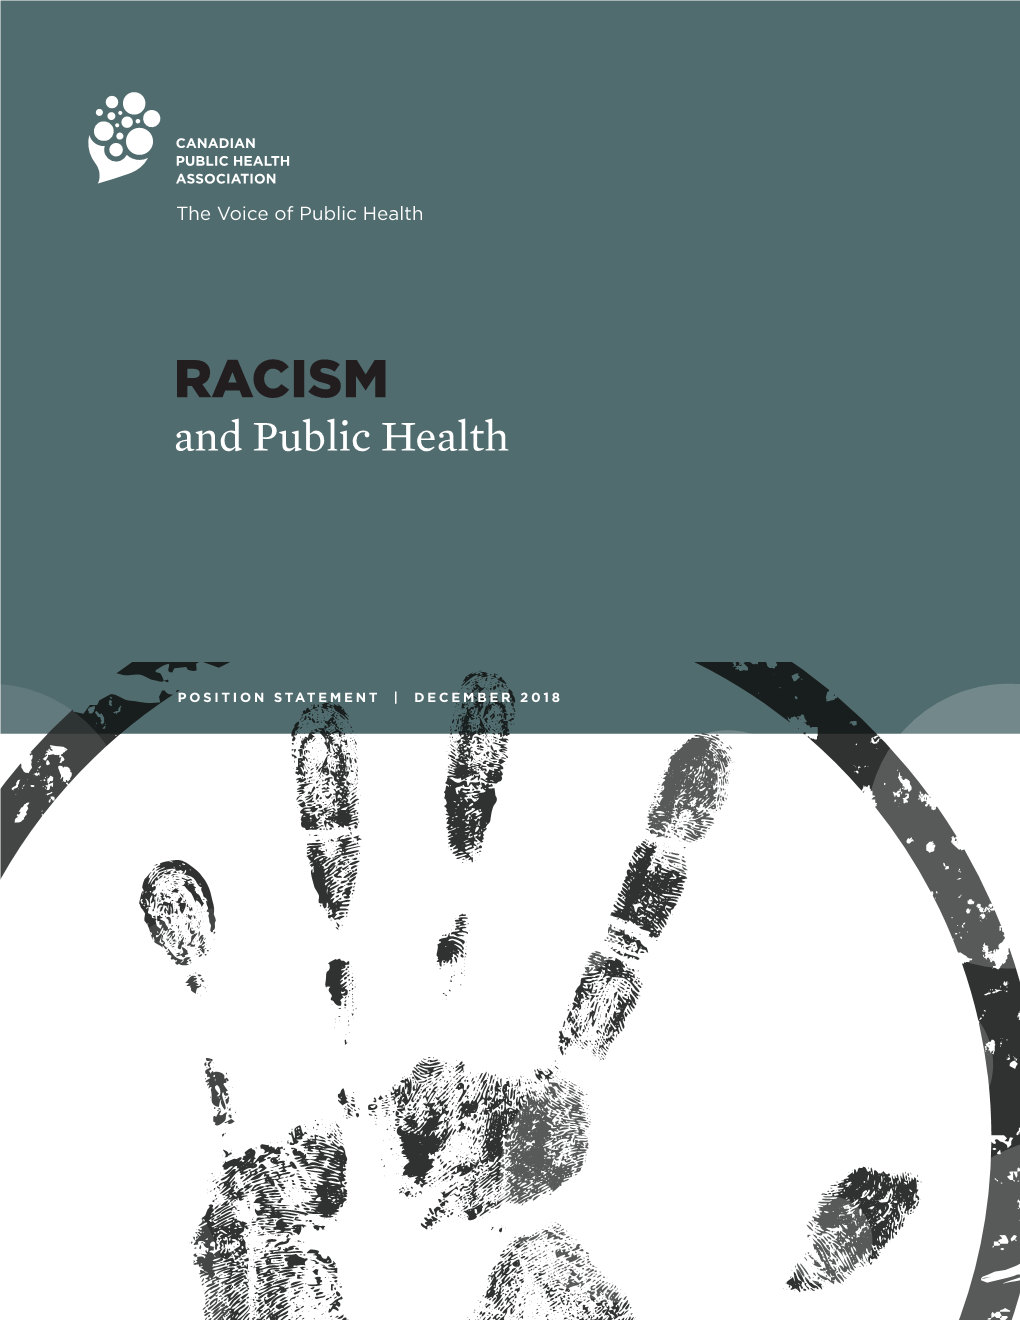 RACISM and Public Health